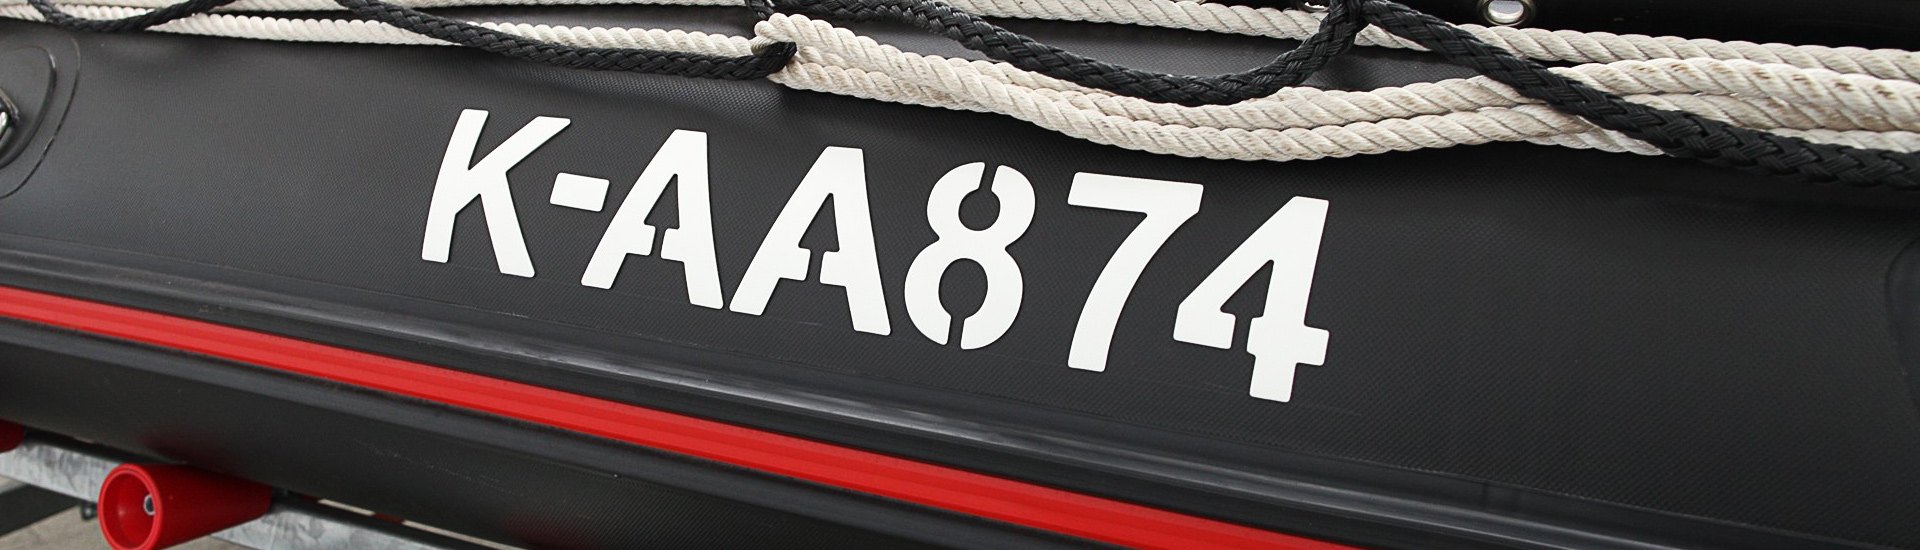 Boat Lettering & Numbers